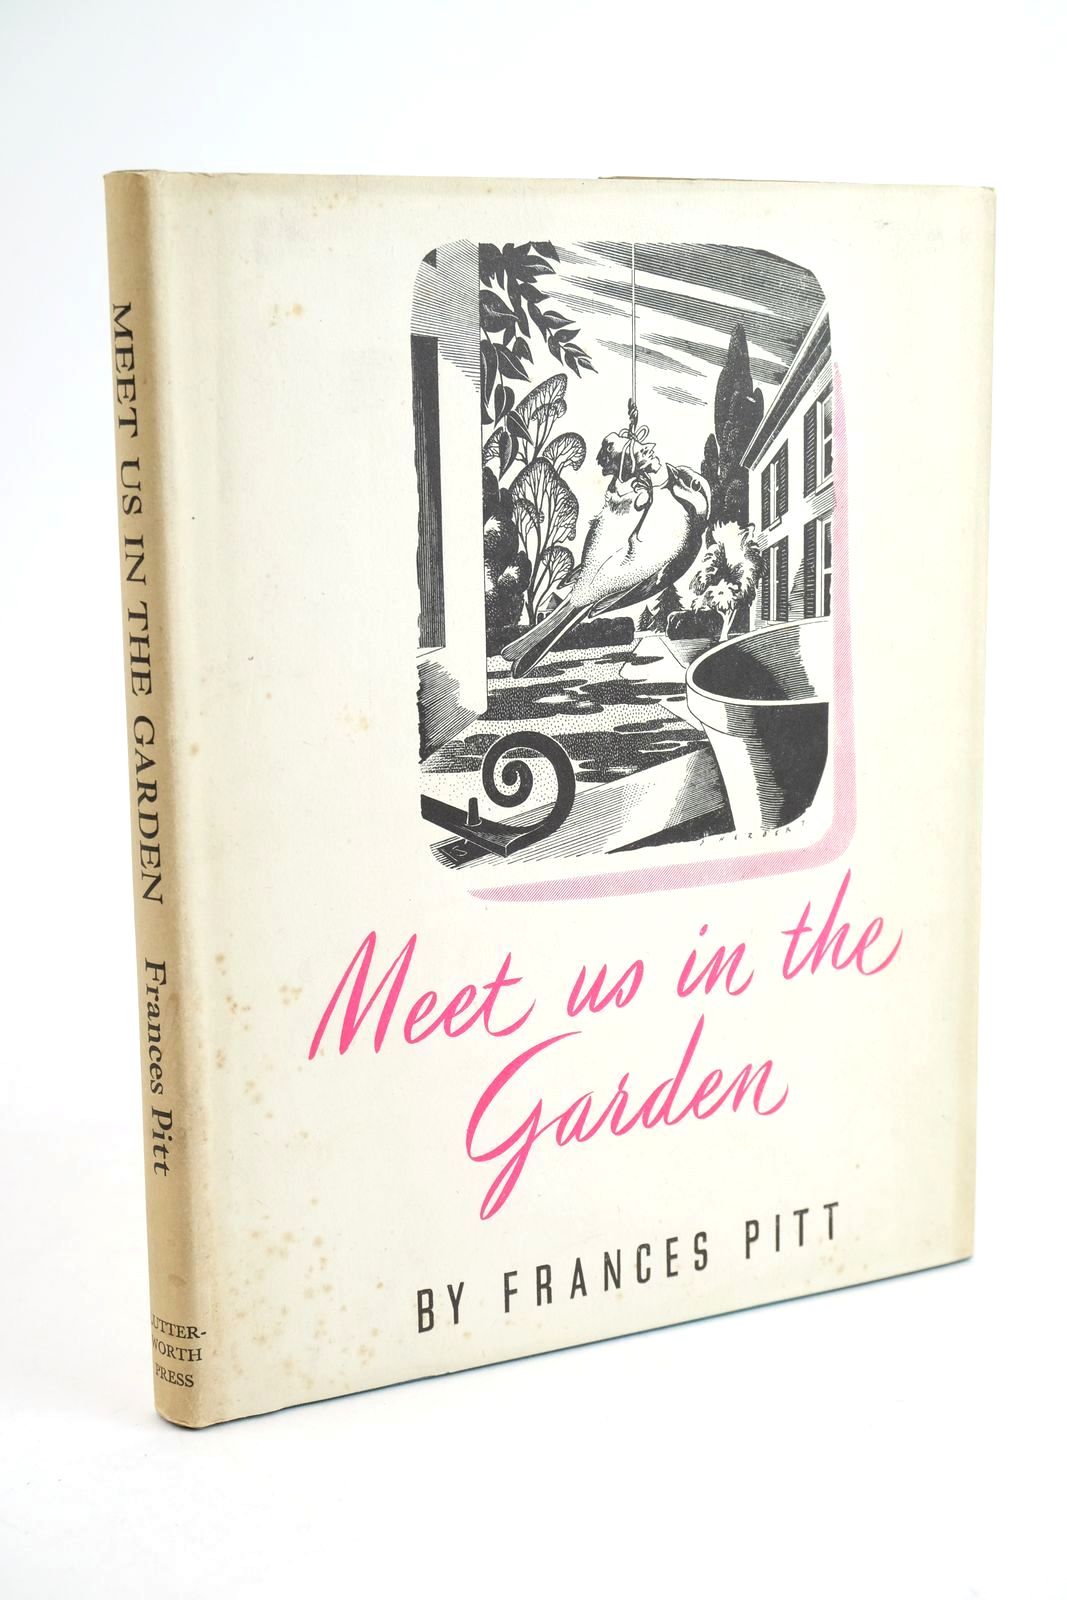 Photo of MEET US IN THE GARDEN written by Pitt, Frances illustrated by Herbert, Stanley published by Lutterworth Press (STOCK CODE: 1323770)  for sale by Stella & Rose's Books